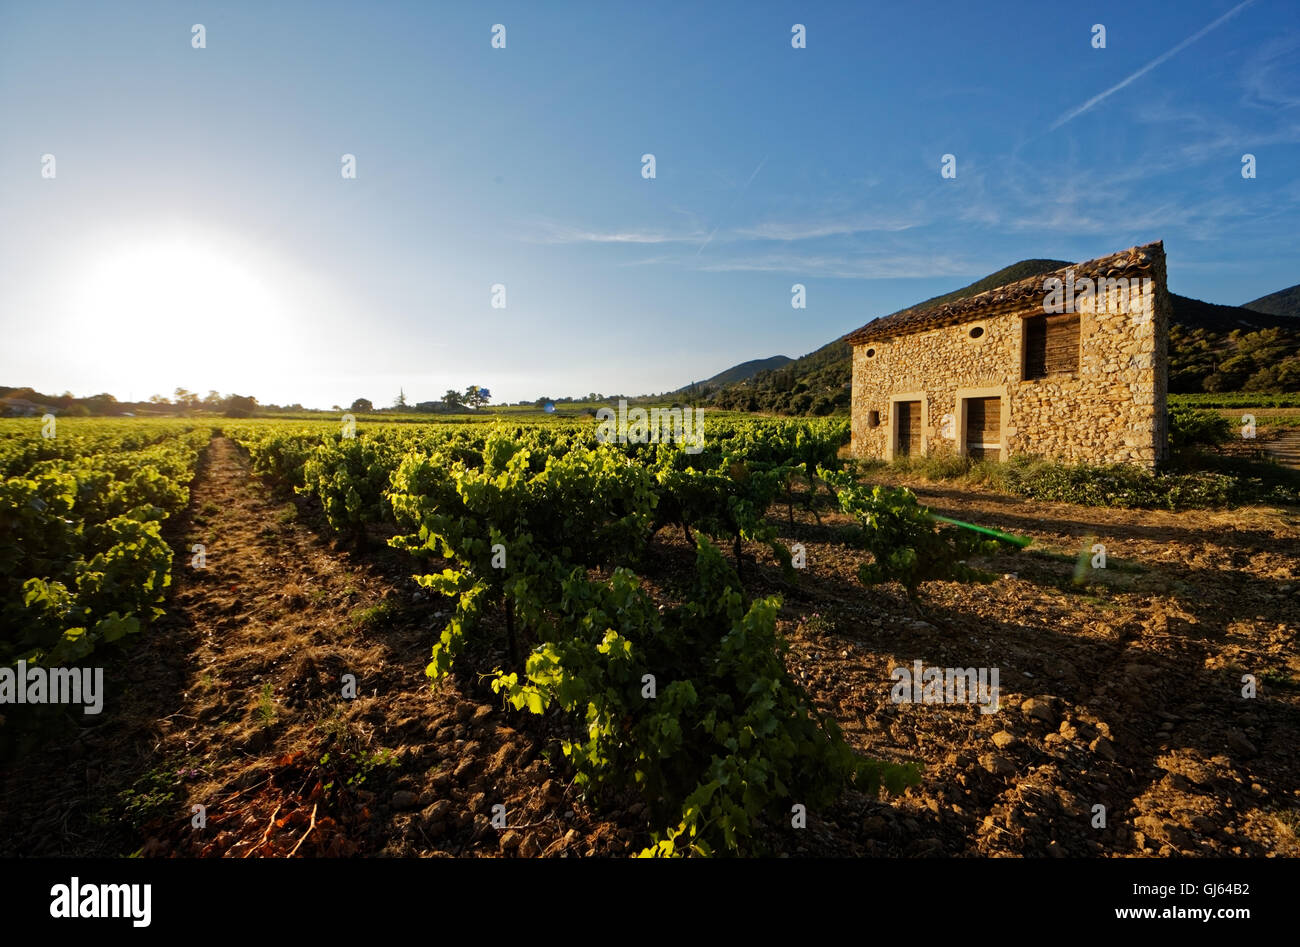 Old small stone house in the wine yards, South of France Stock Photo